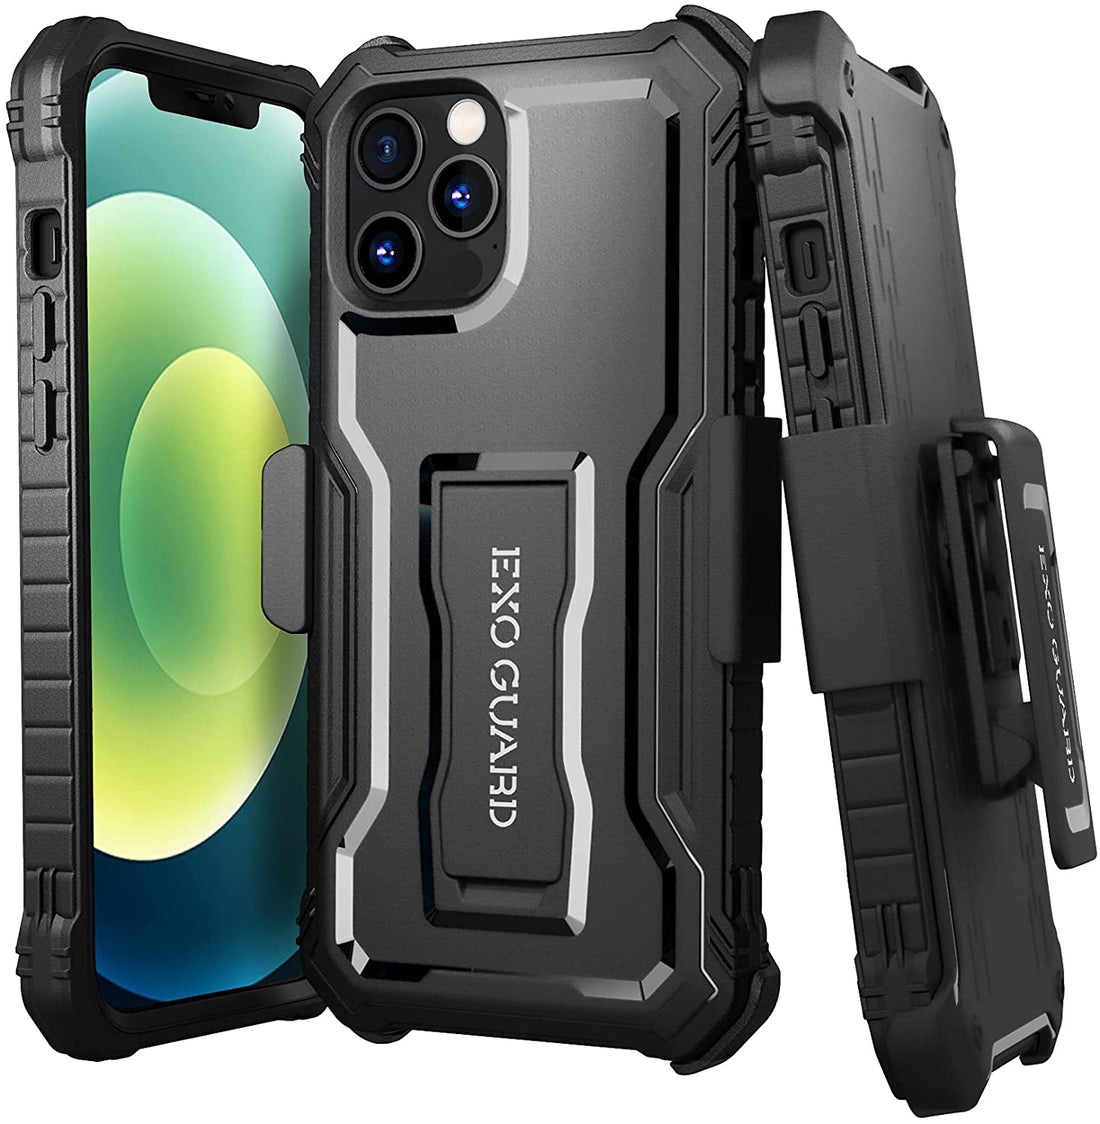 ExoGuard Belt Clip Holster for Apple iPhone 12 Series Case, Heavy Duty Belt Clip Holster and Adjustable with 360 Degree Rotation for iPhone 12/iPhone 12 Pro/iPhone 12 pro max（BLACK)